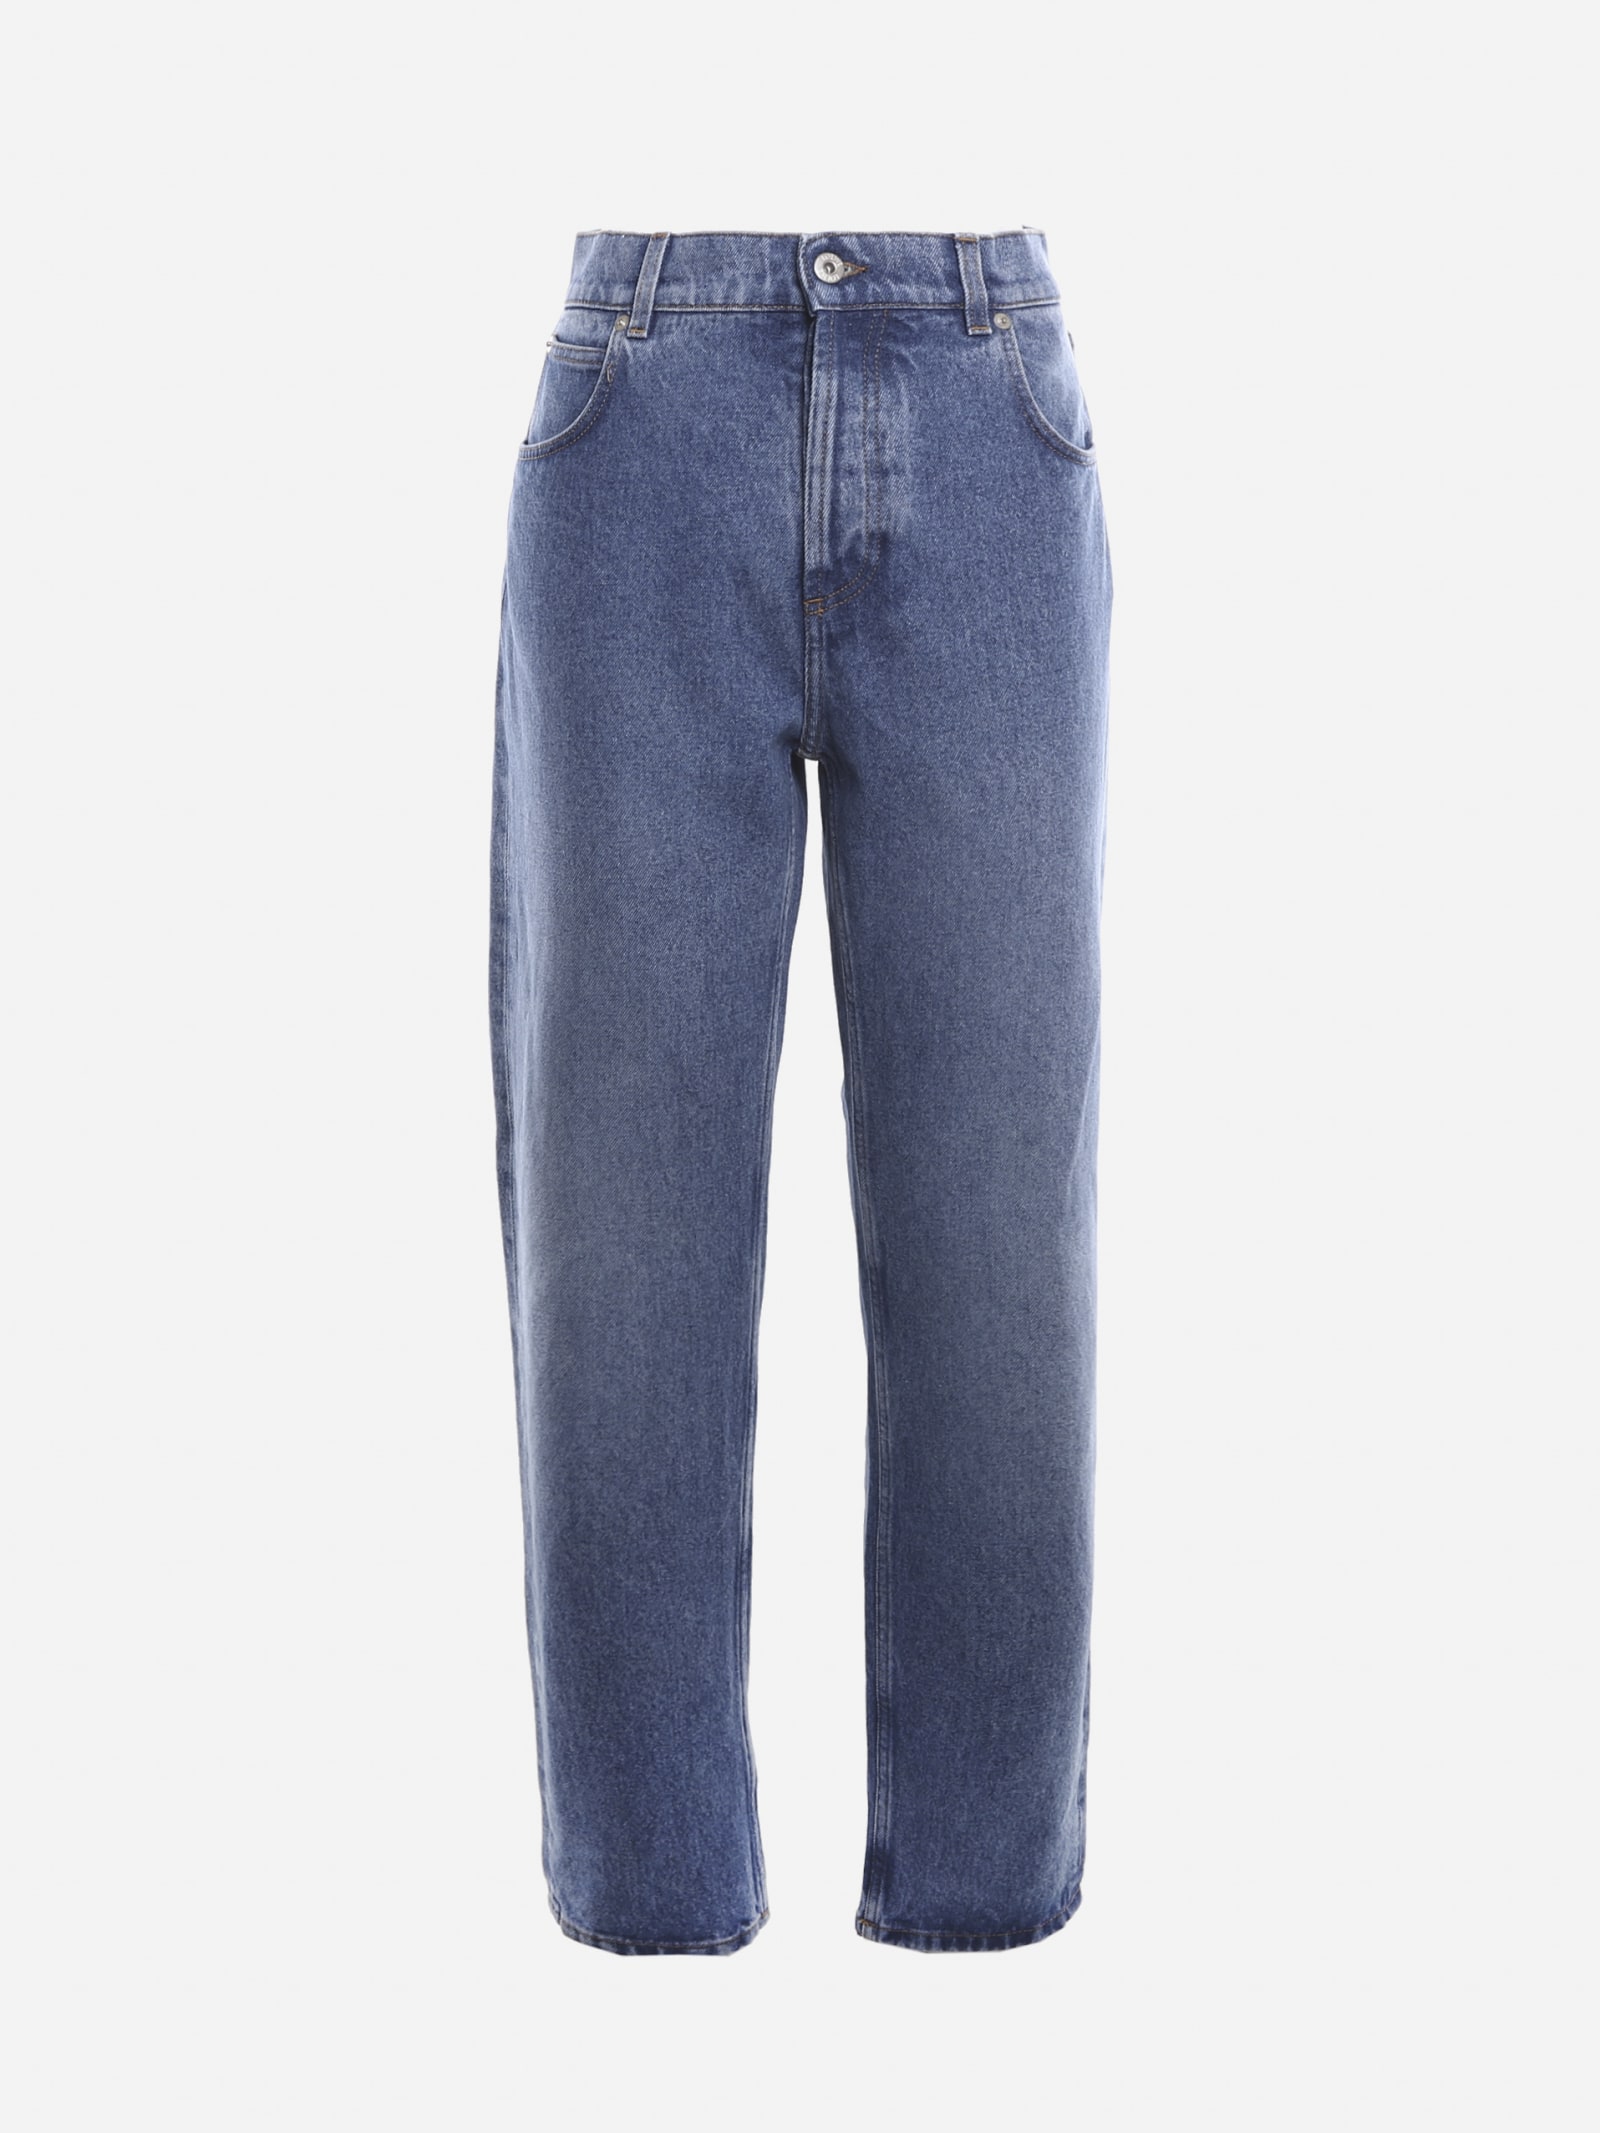 Loewe Anagram Cotton Jeans With Leather Insert